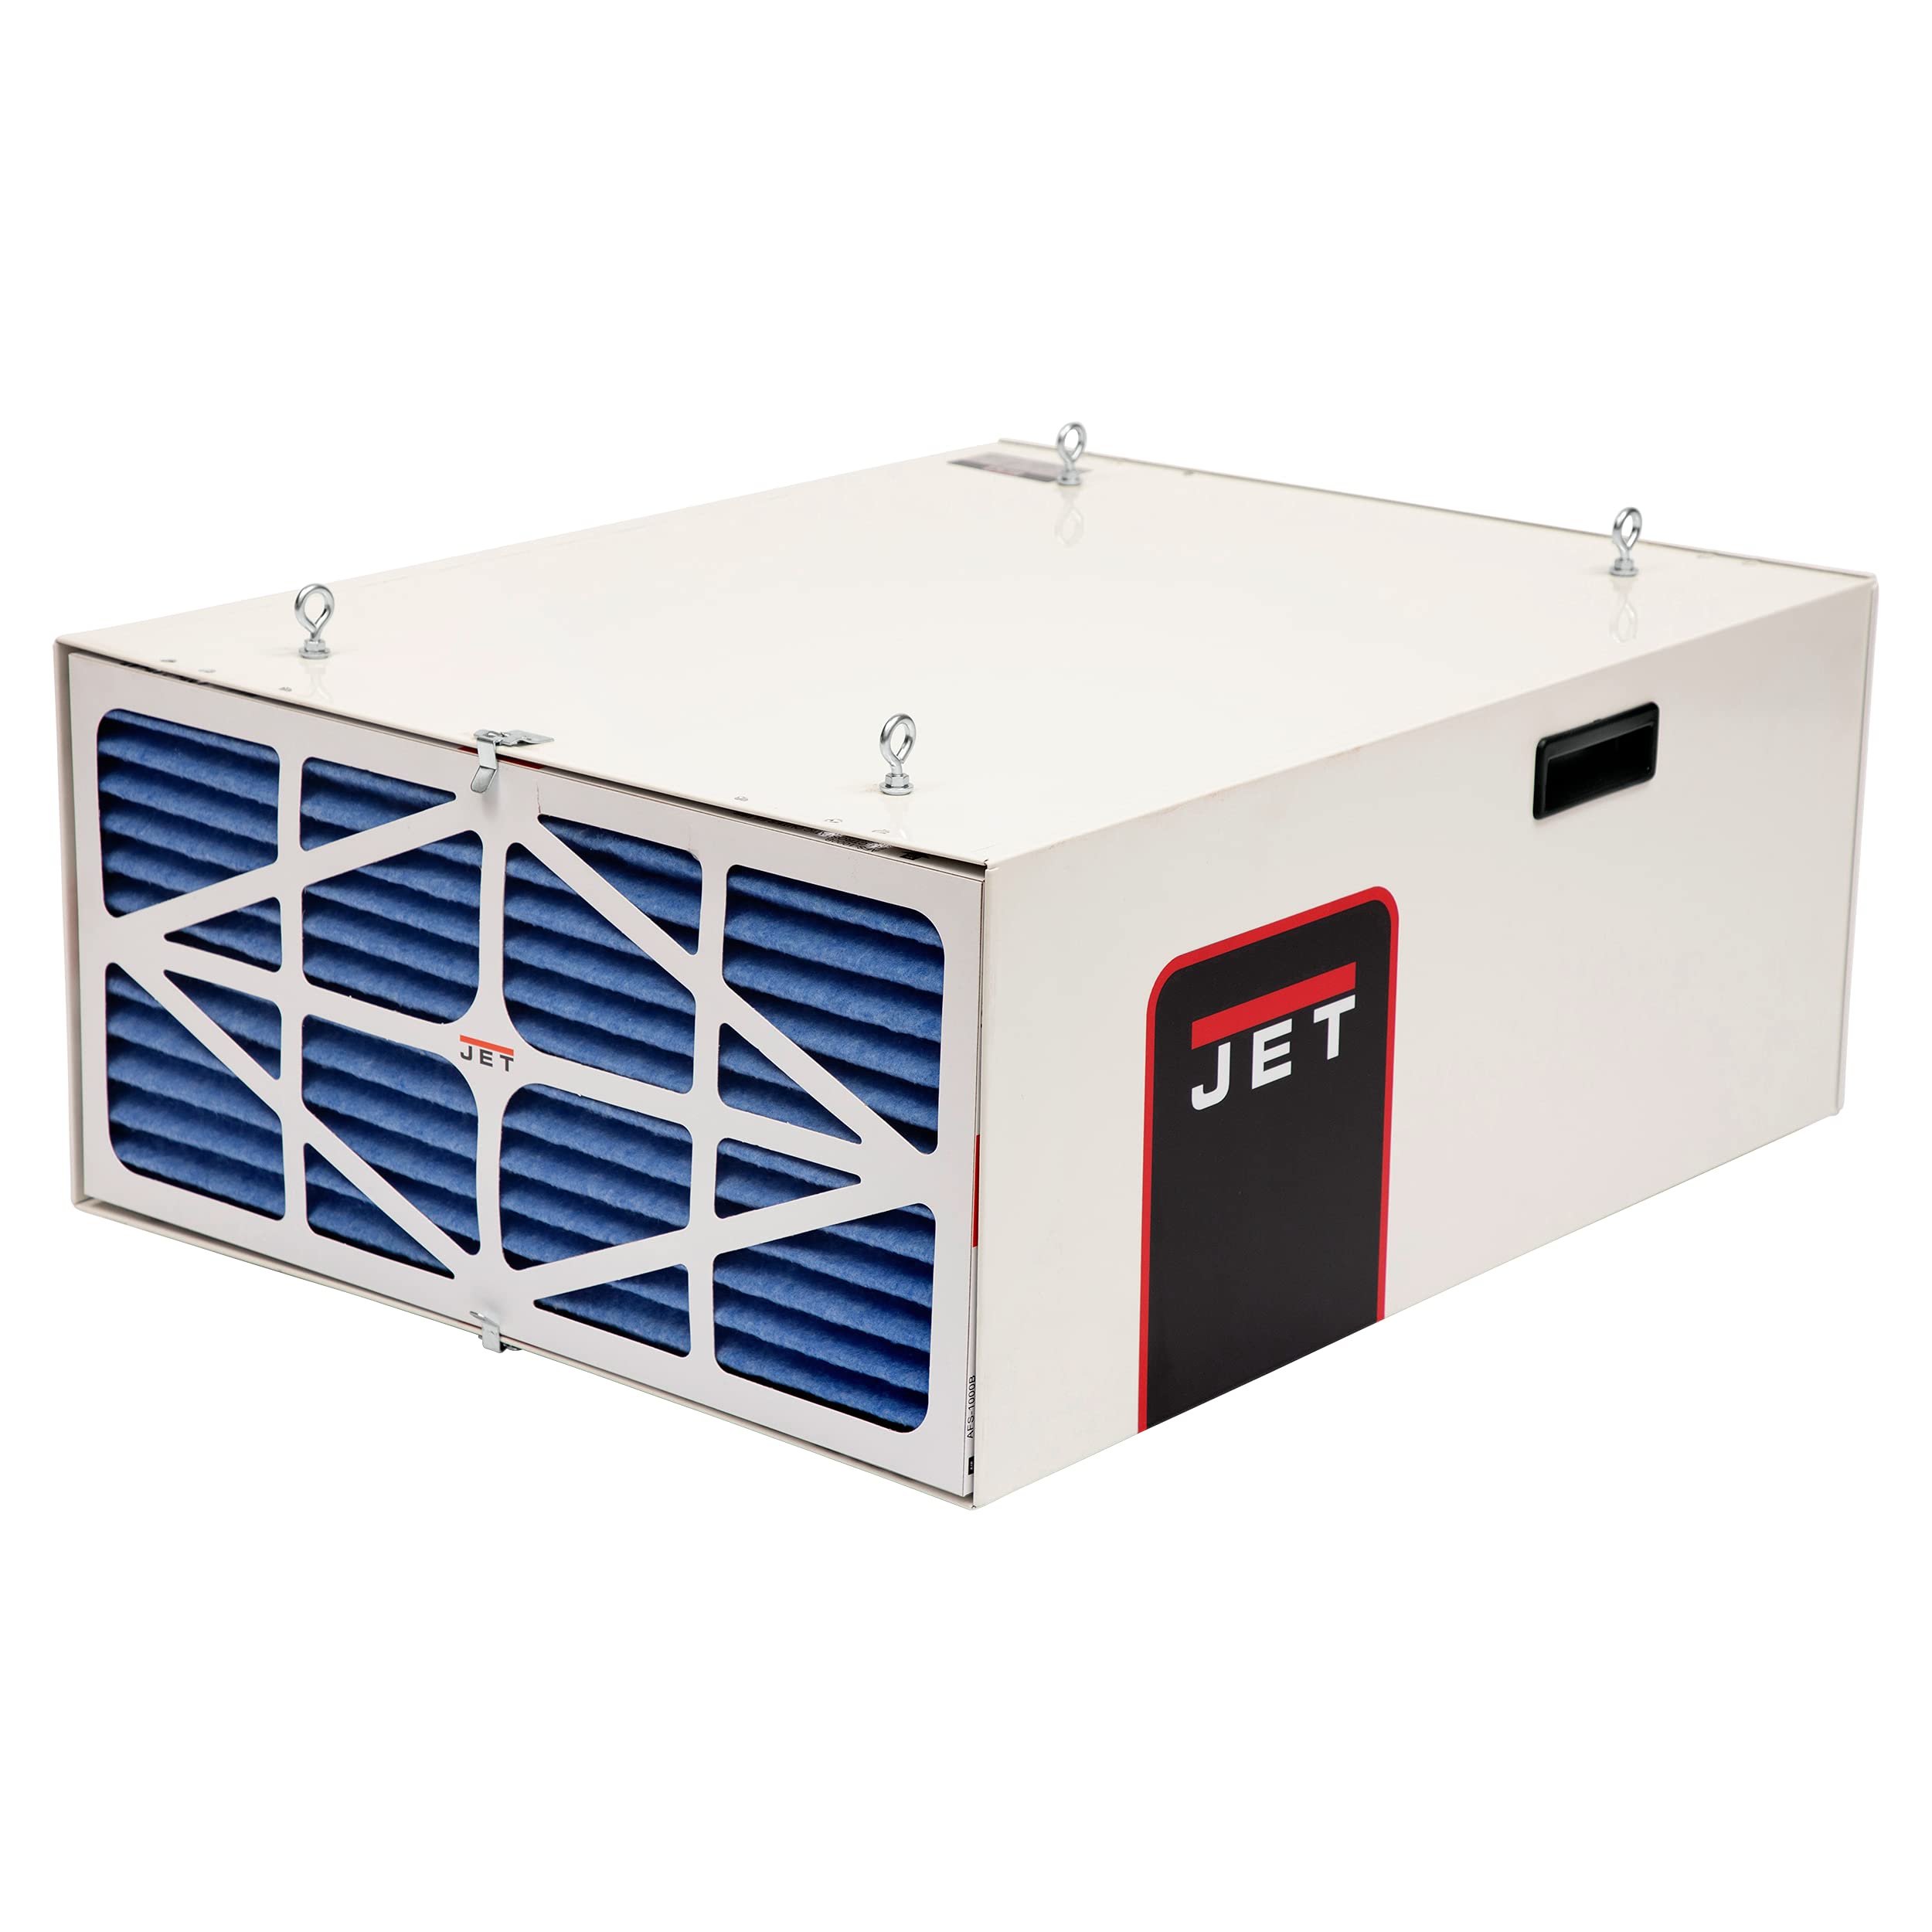 AFS-2000 1700CFM Air Filtration System 3-Speed